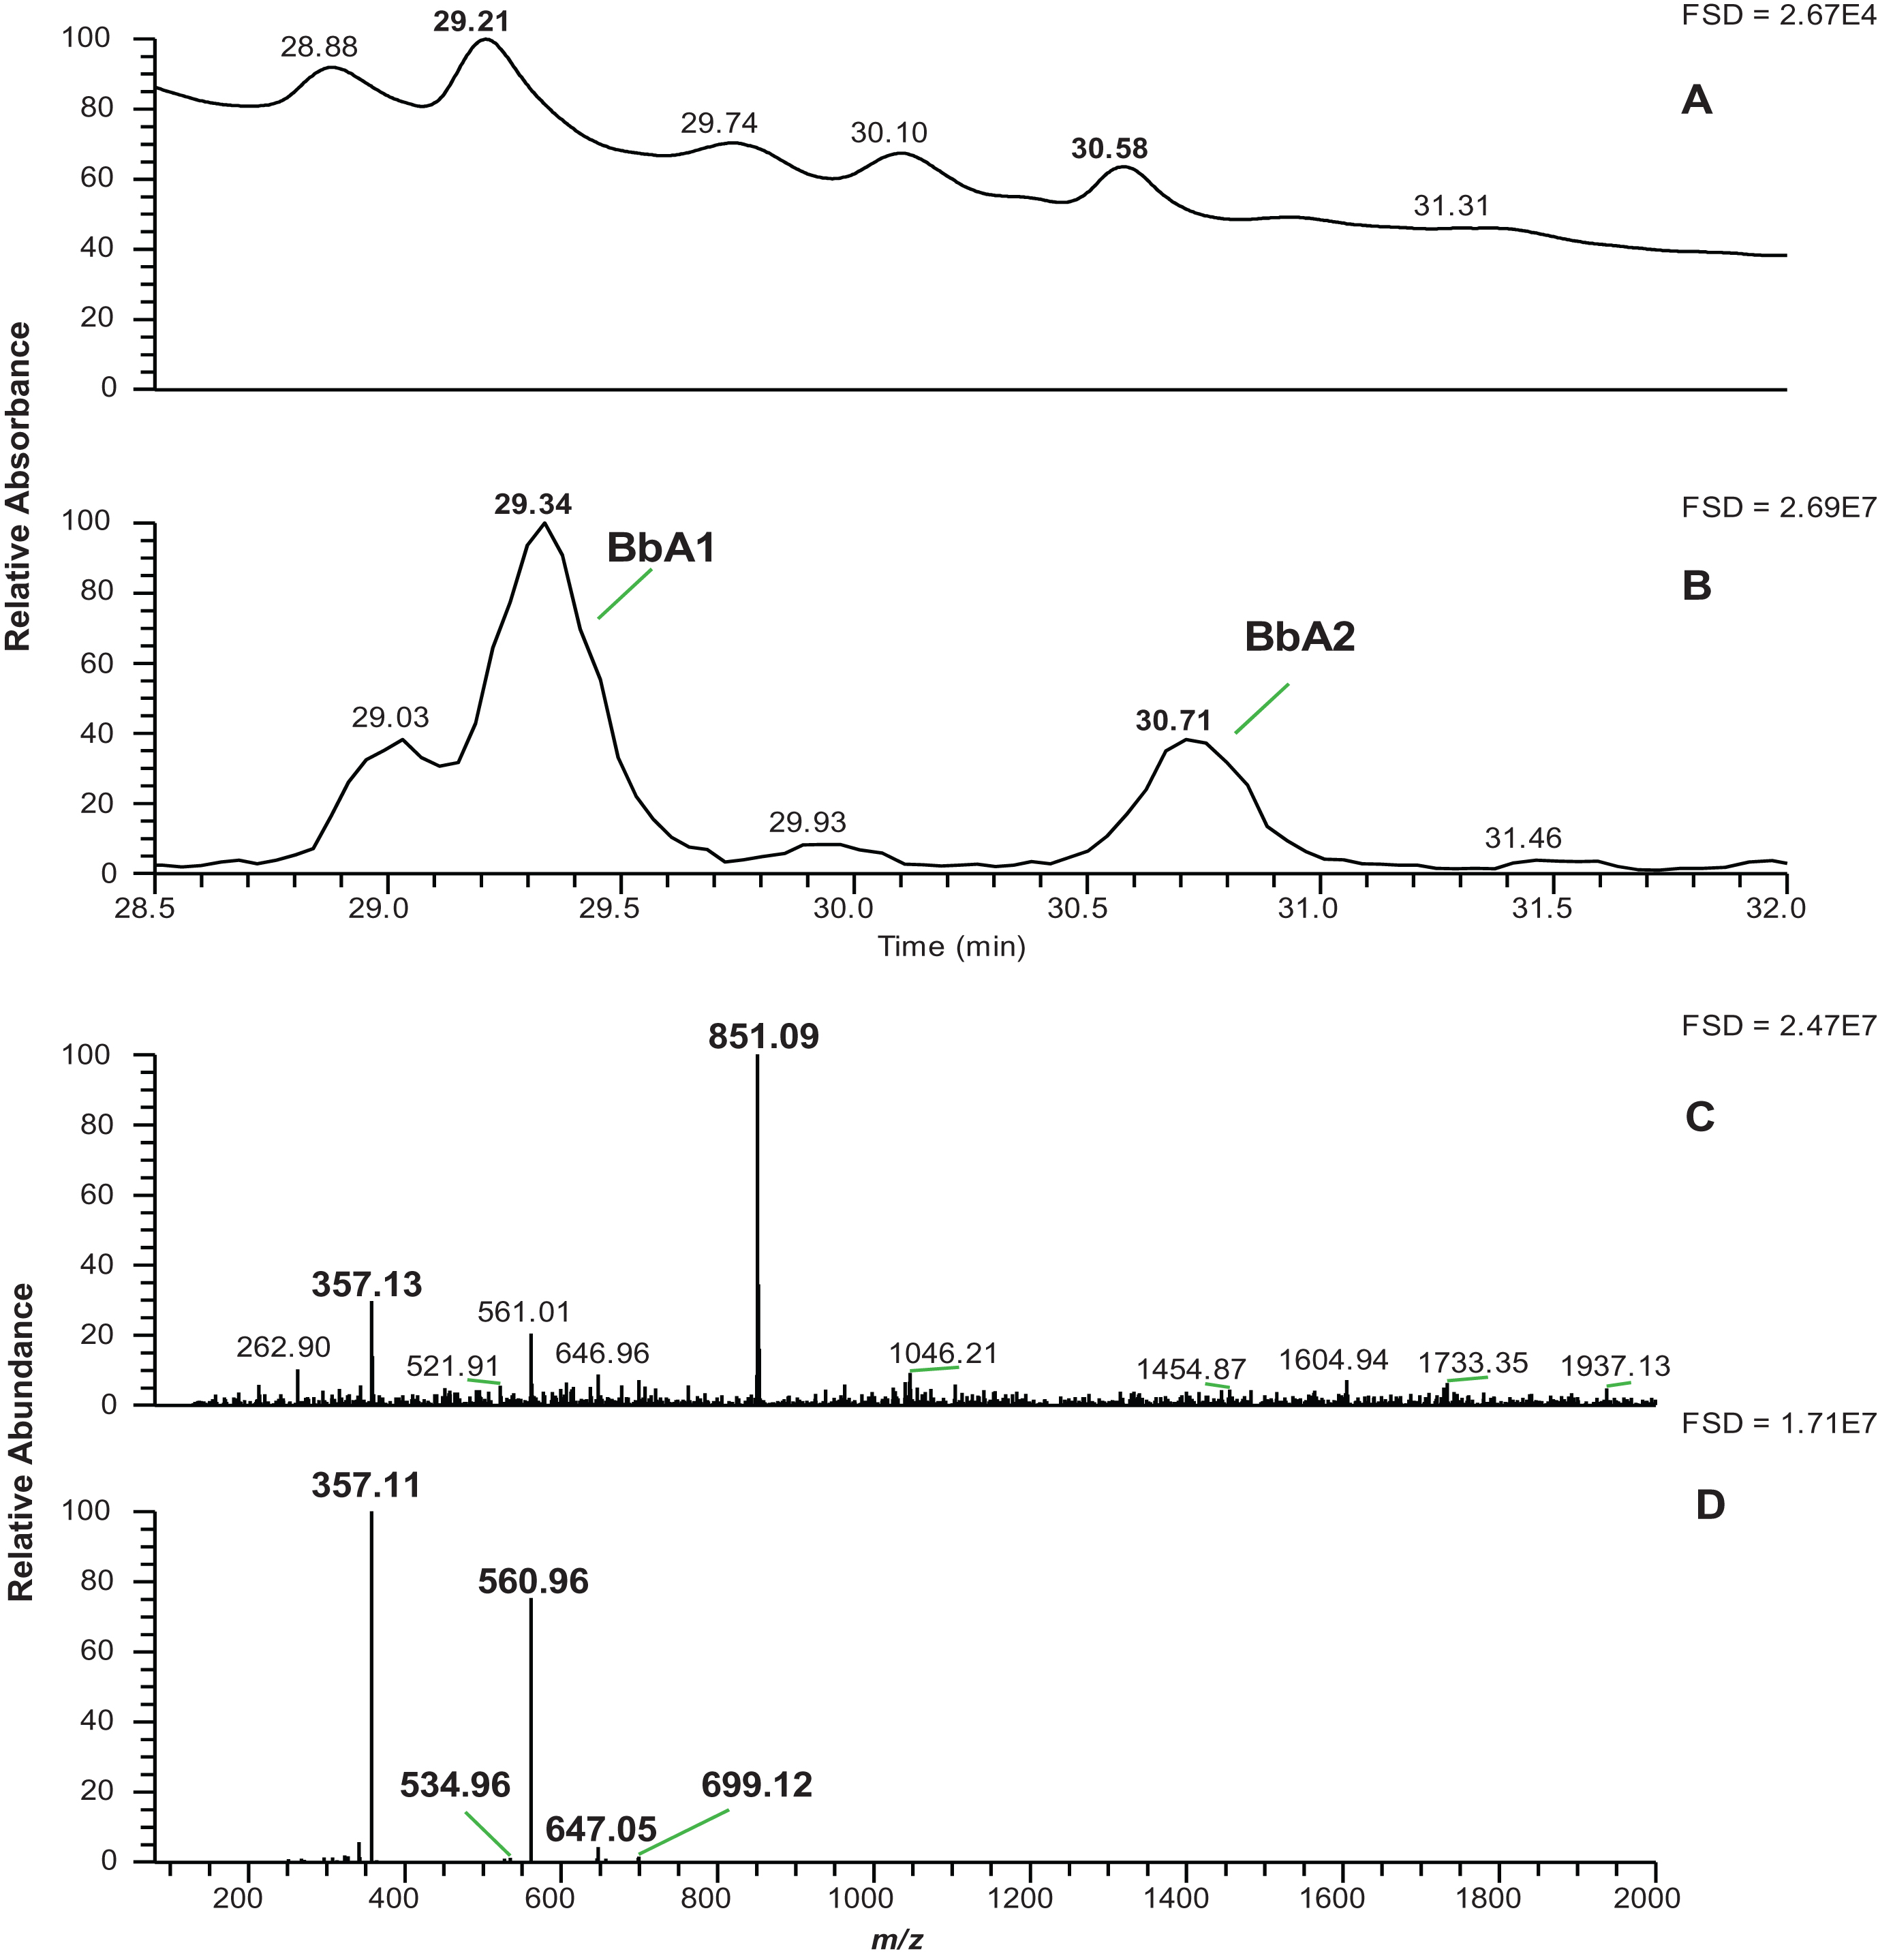 Ethyl linked anthocyanin (epi)catechin derivatives in blueberry extracts. Panel A shows the PDA profile at 520 nm of the blueberry extract from variety Bluecrop. Panel B shows the MS profile at m/z [M+H]+ 851 with peaks BbA1 and BbA2 denoted; Panel C shows the MS spectra under peak BbA1 & Panel D shows the MS2 spectra of m/z [M+H]+ 851. Figures in the top right hand corner are the full scale deflections (FSD) of the detectors.